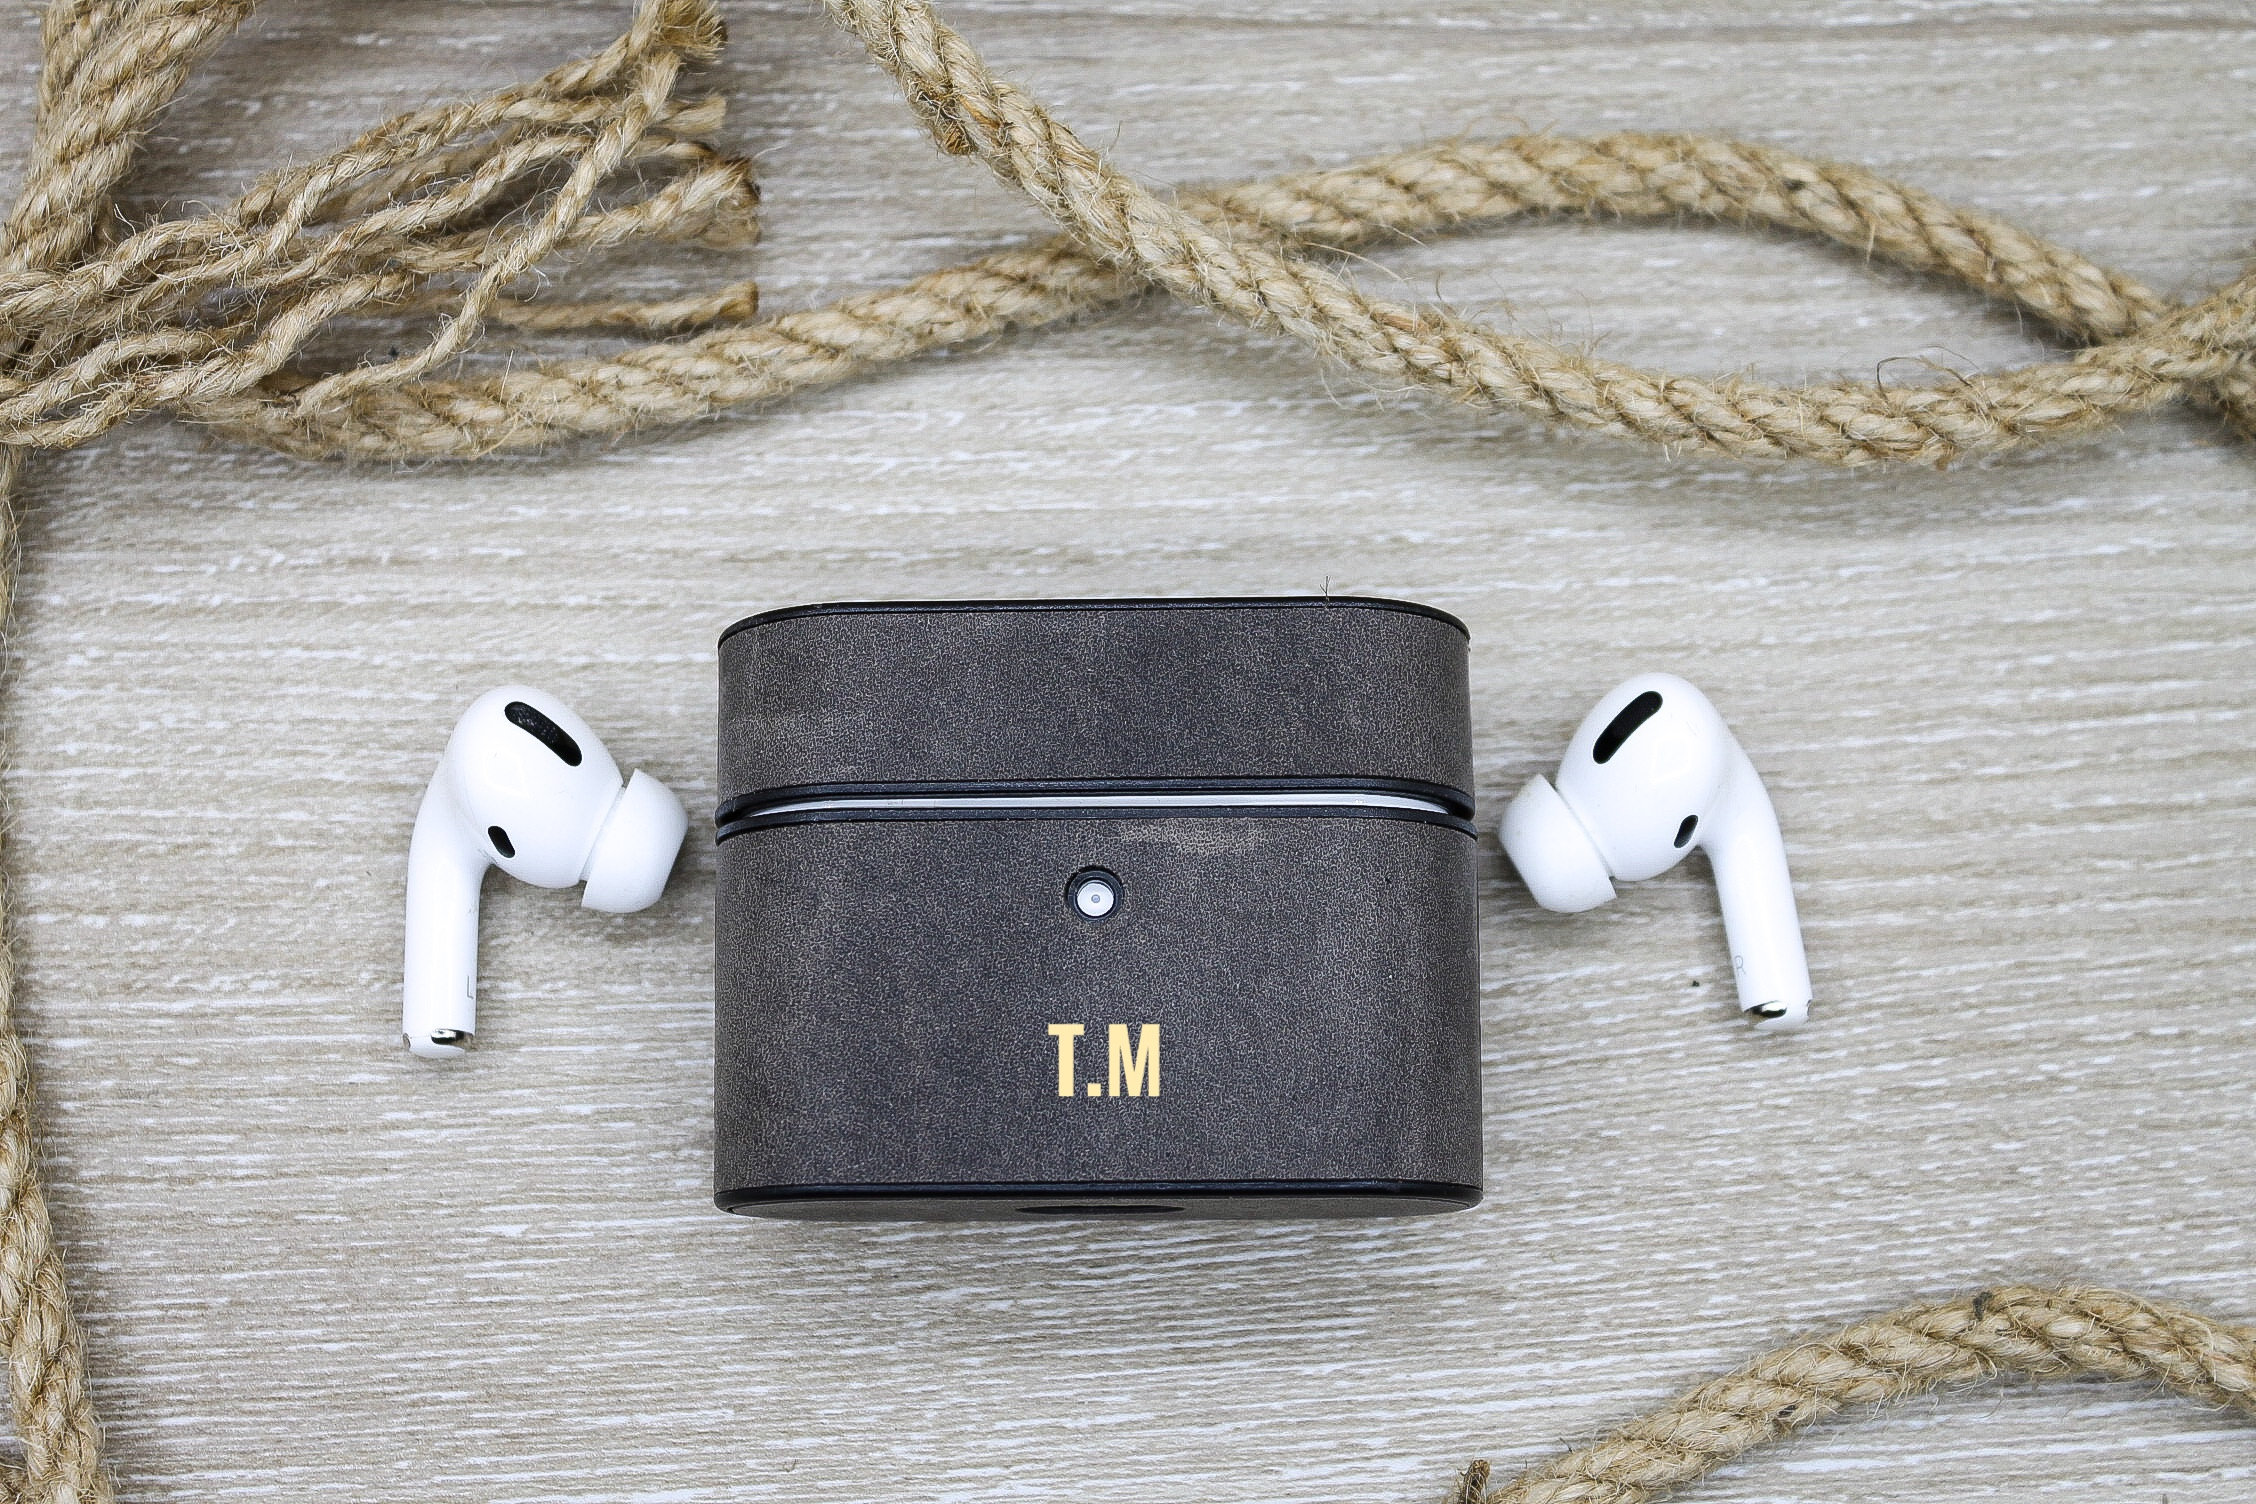 Airpod case Handmade luxury Grey & Brown AirPod case. Golden hardware. Fits  both first generation AirPods and AirPod Pros.